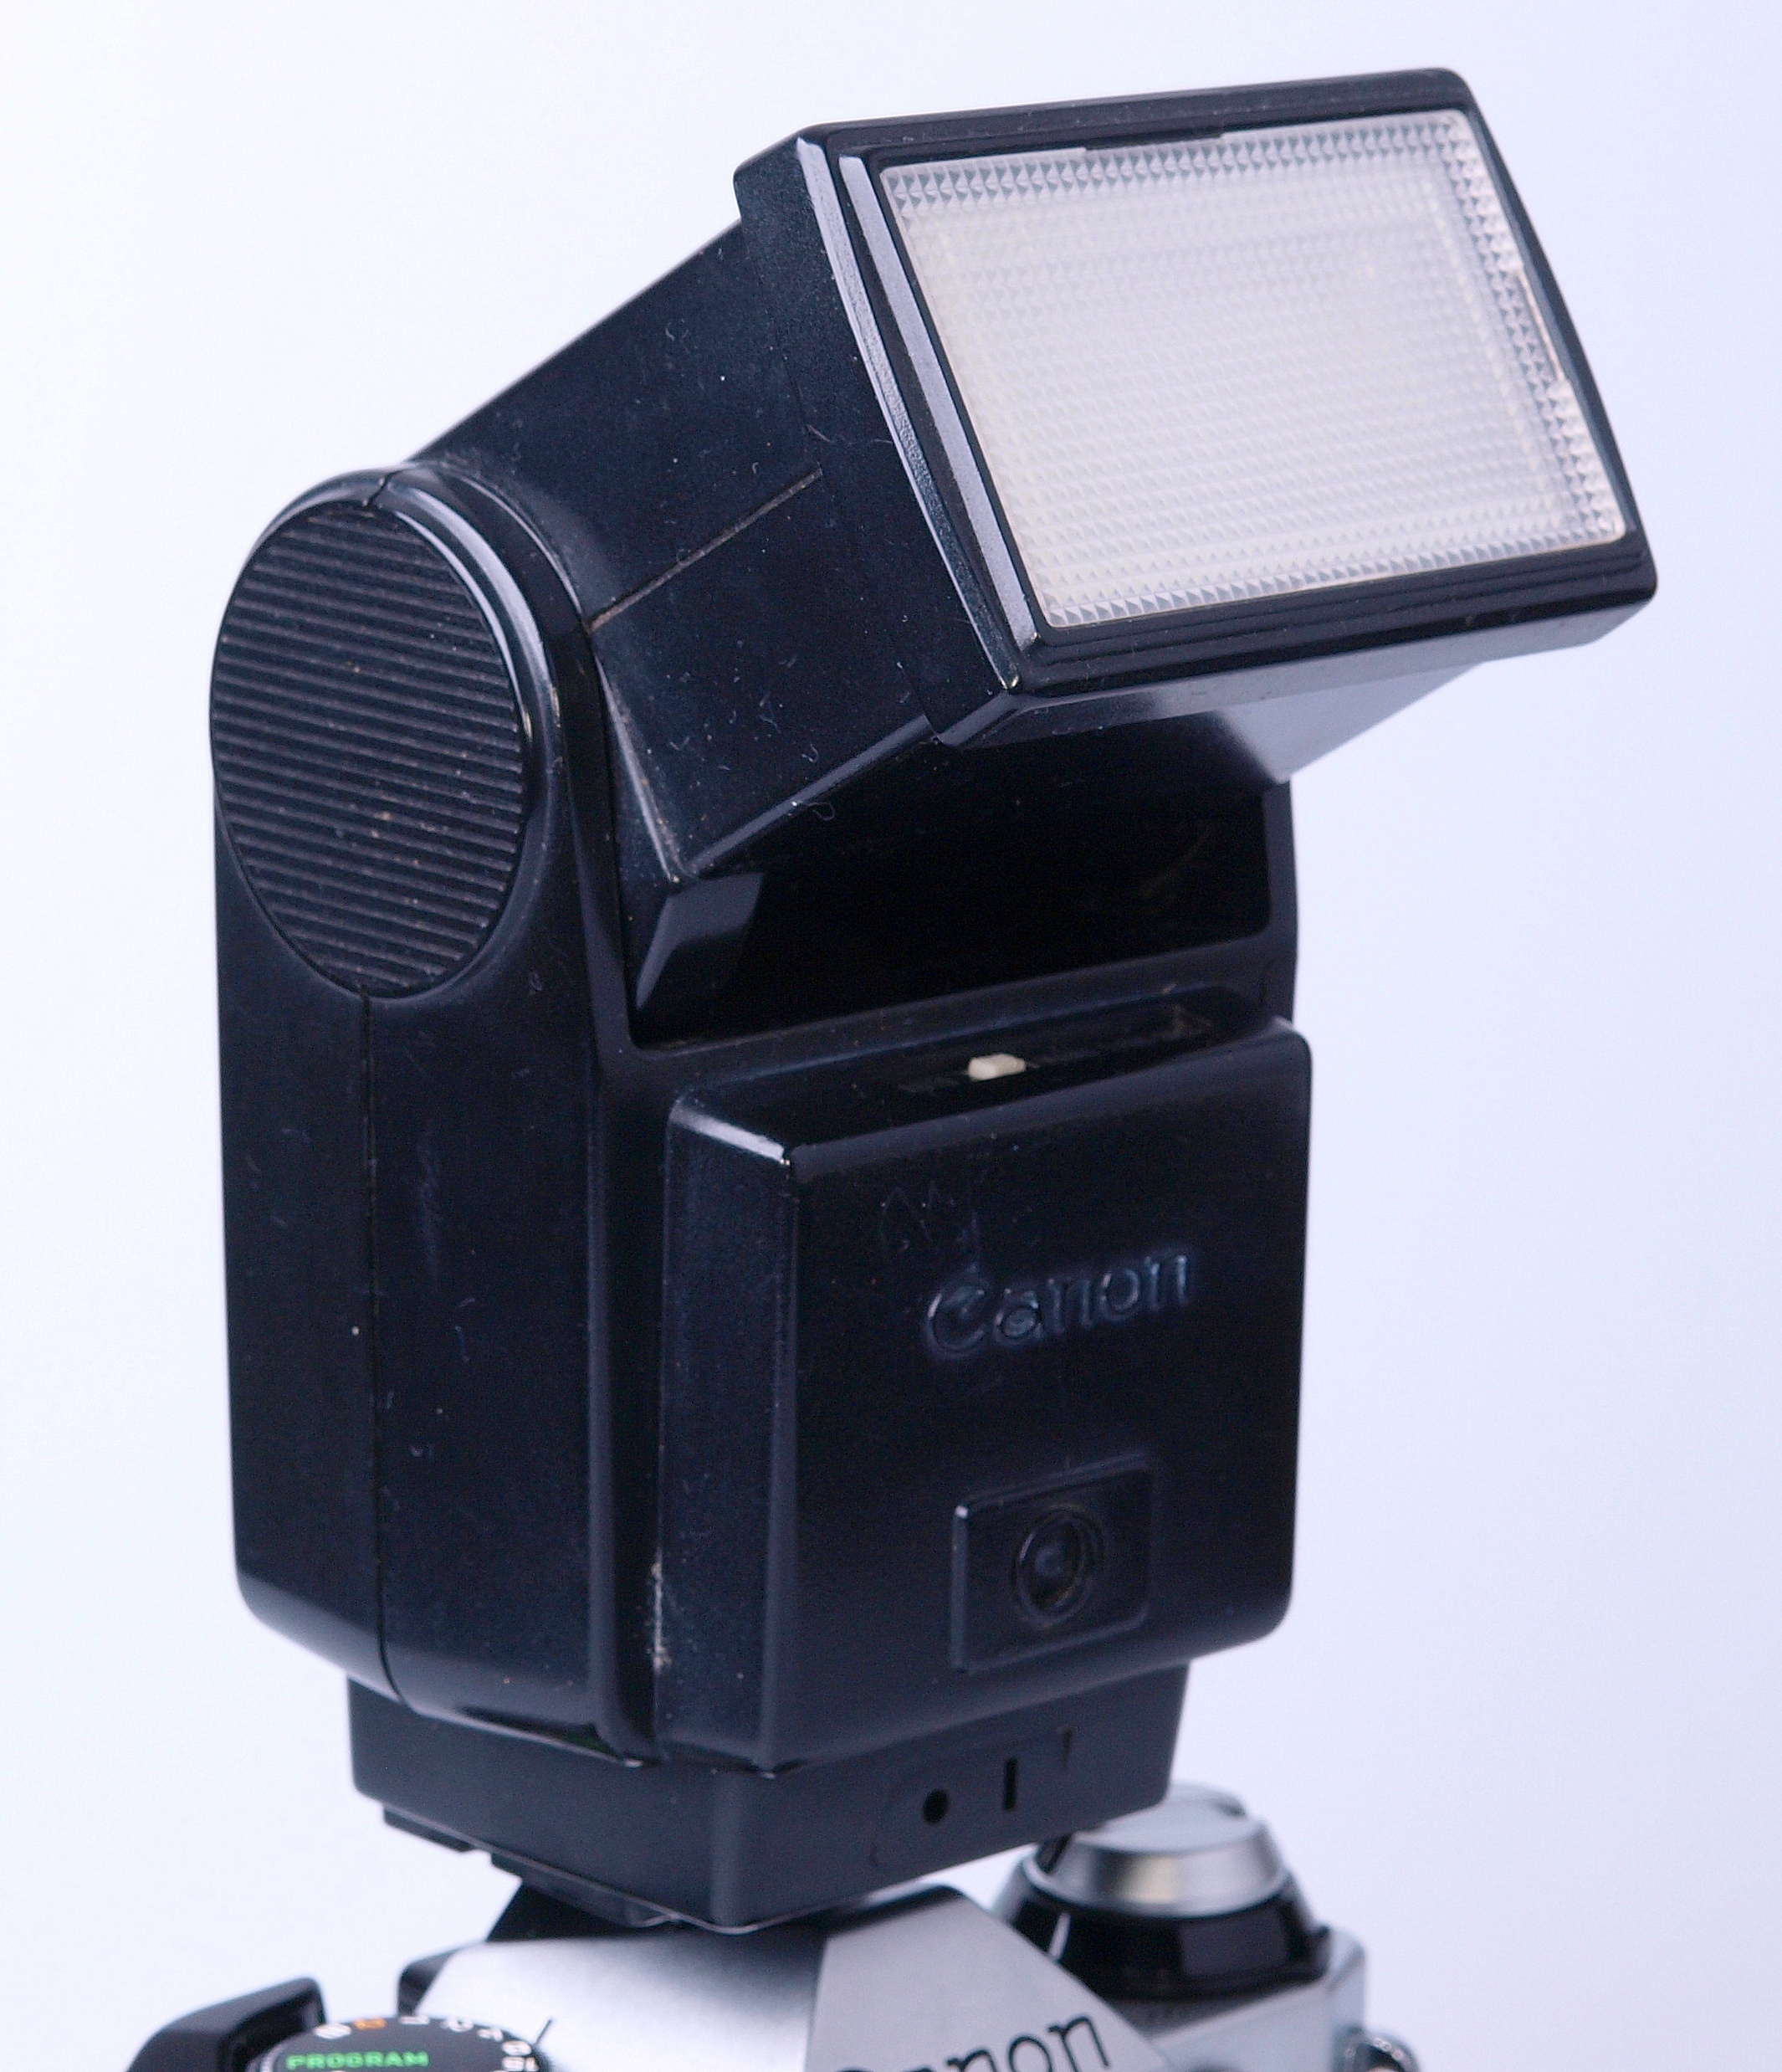 Canon Speedlite 199A flash unit. for use with A series cameras. – Wide